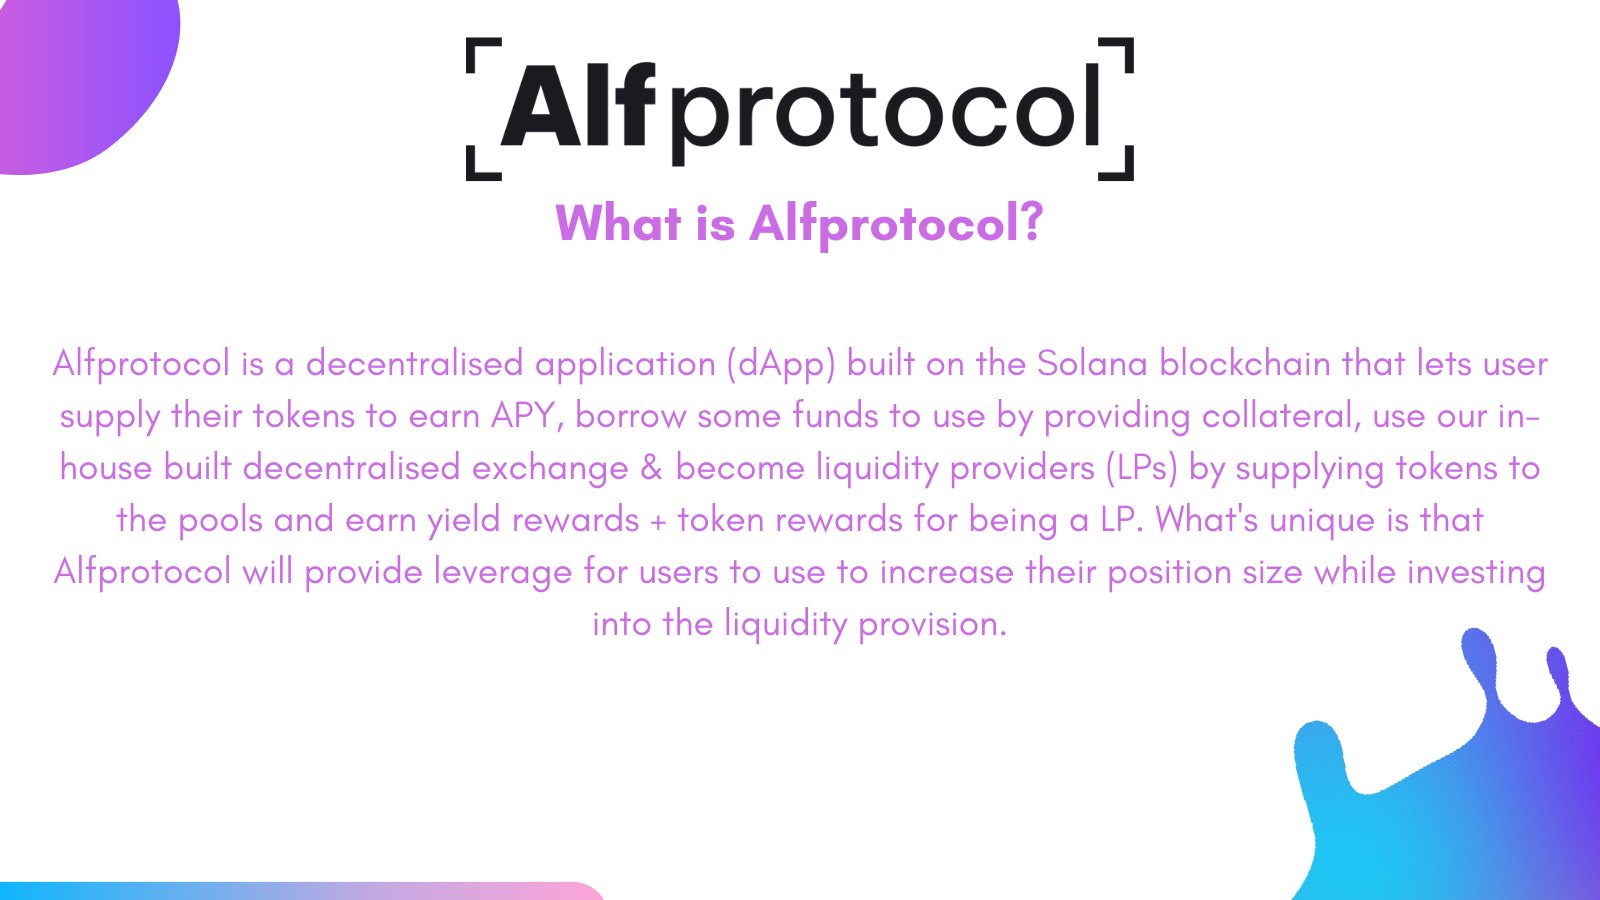 What is Alf Protocol?